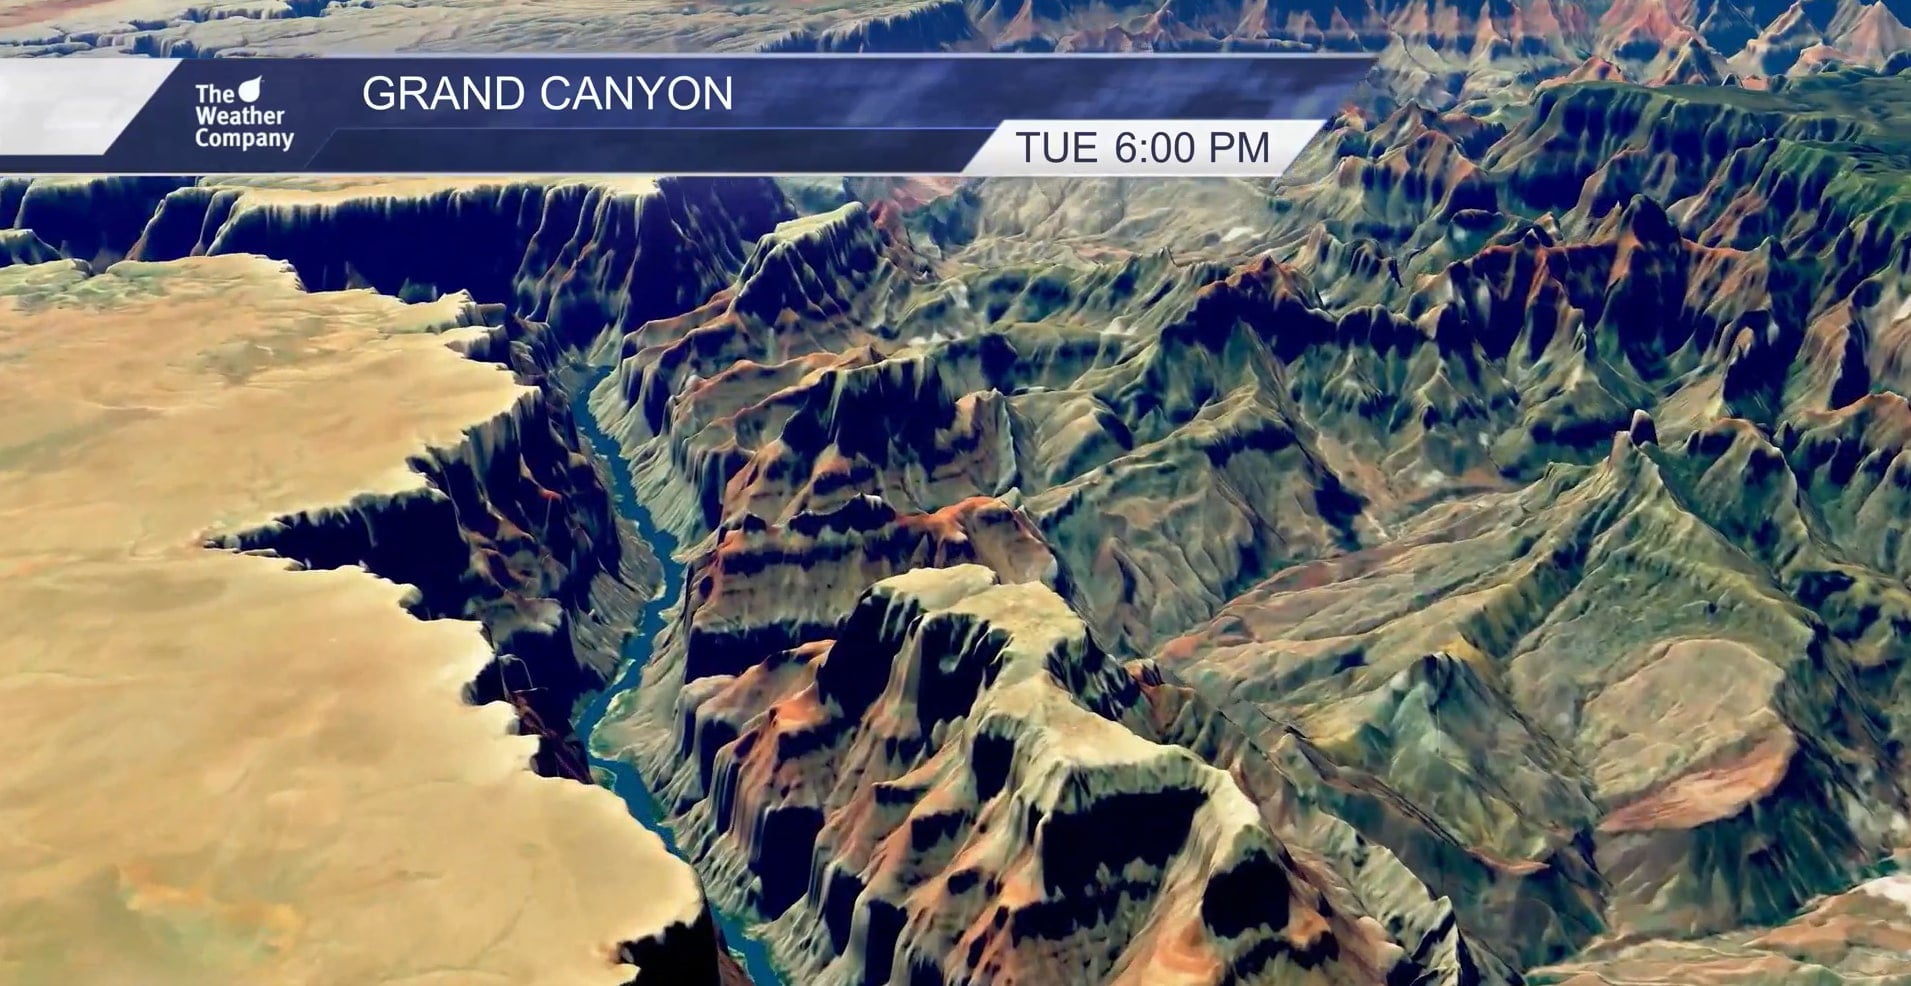 The Grand Canyon as seen on MAXimum Earth